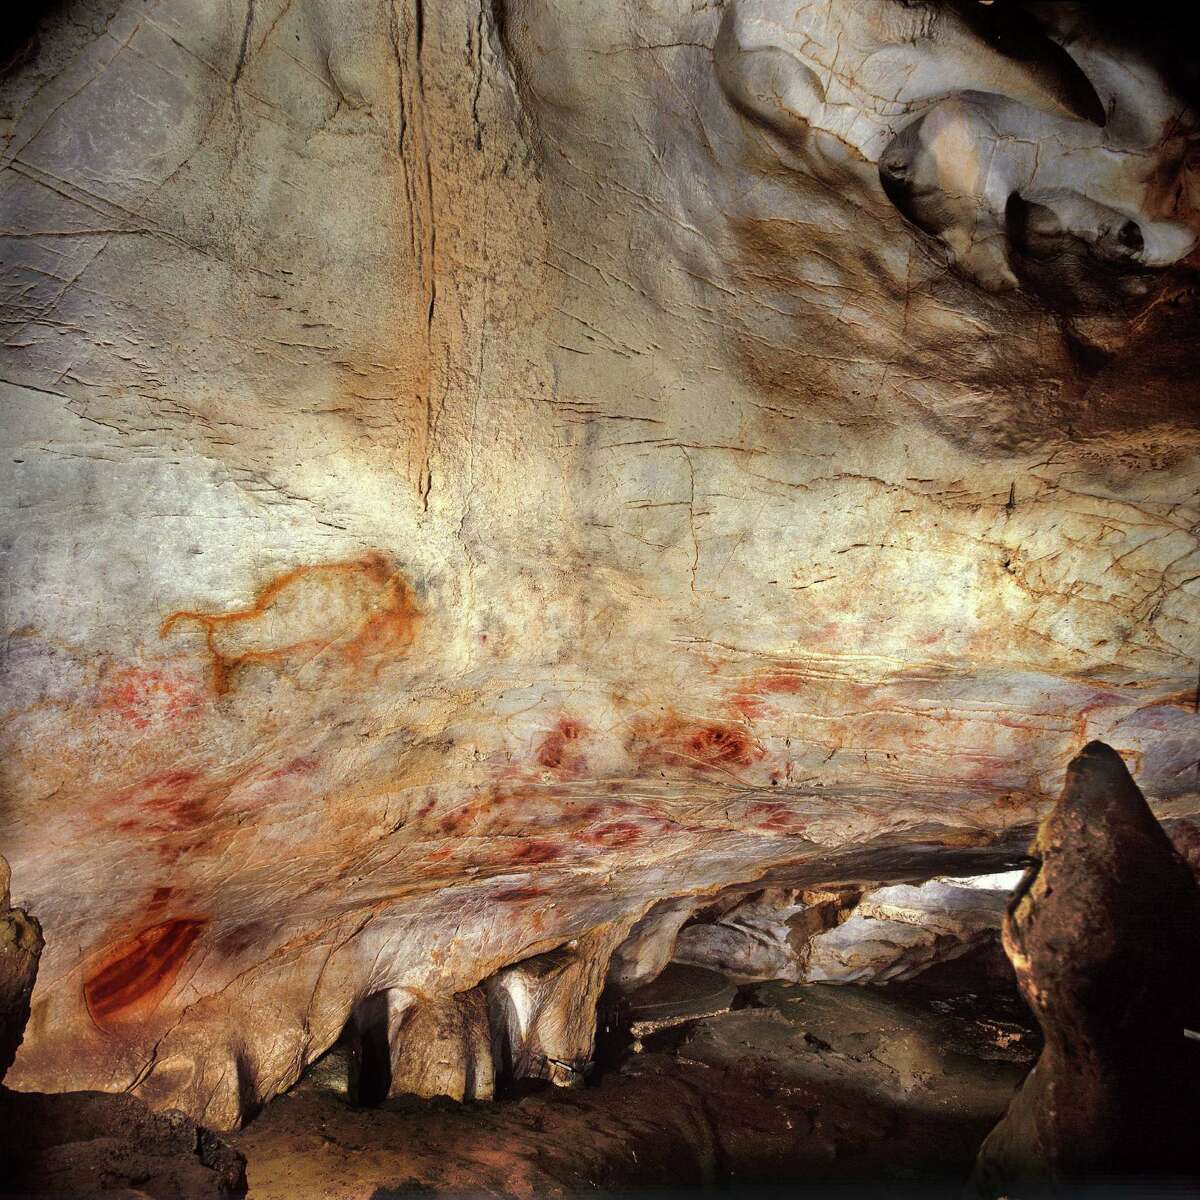 This undated handout photo provided by pedro suara/aaas shows the 'Panel of Hands', El Castillo Cave showing red disks and hand stencils made by blowing or spitting paint onto the wall. A date from a disk shows the painting to be older than 40,800 years making it the oldest known cave art in Europe. The bison overlay the hands and are therefore painted later. New tests show that crude Spanish cave paintings of a red sphere and handprints are the oldest in the world, so ancient they may not have been by modern man. They might have even been made by the much-maligned Neanderthals, some scientists suggest but others disagree. (AP Photo/Pedro Saura, AAAS)